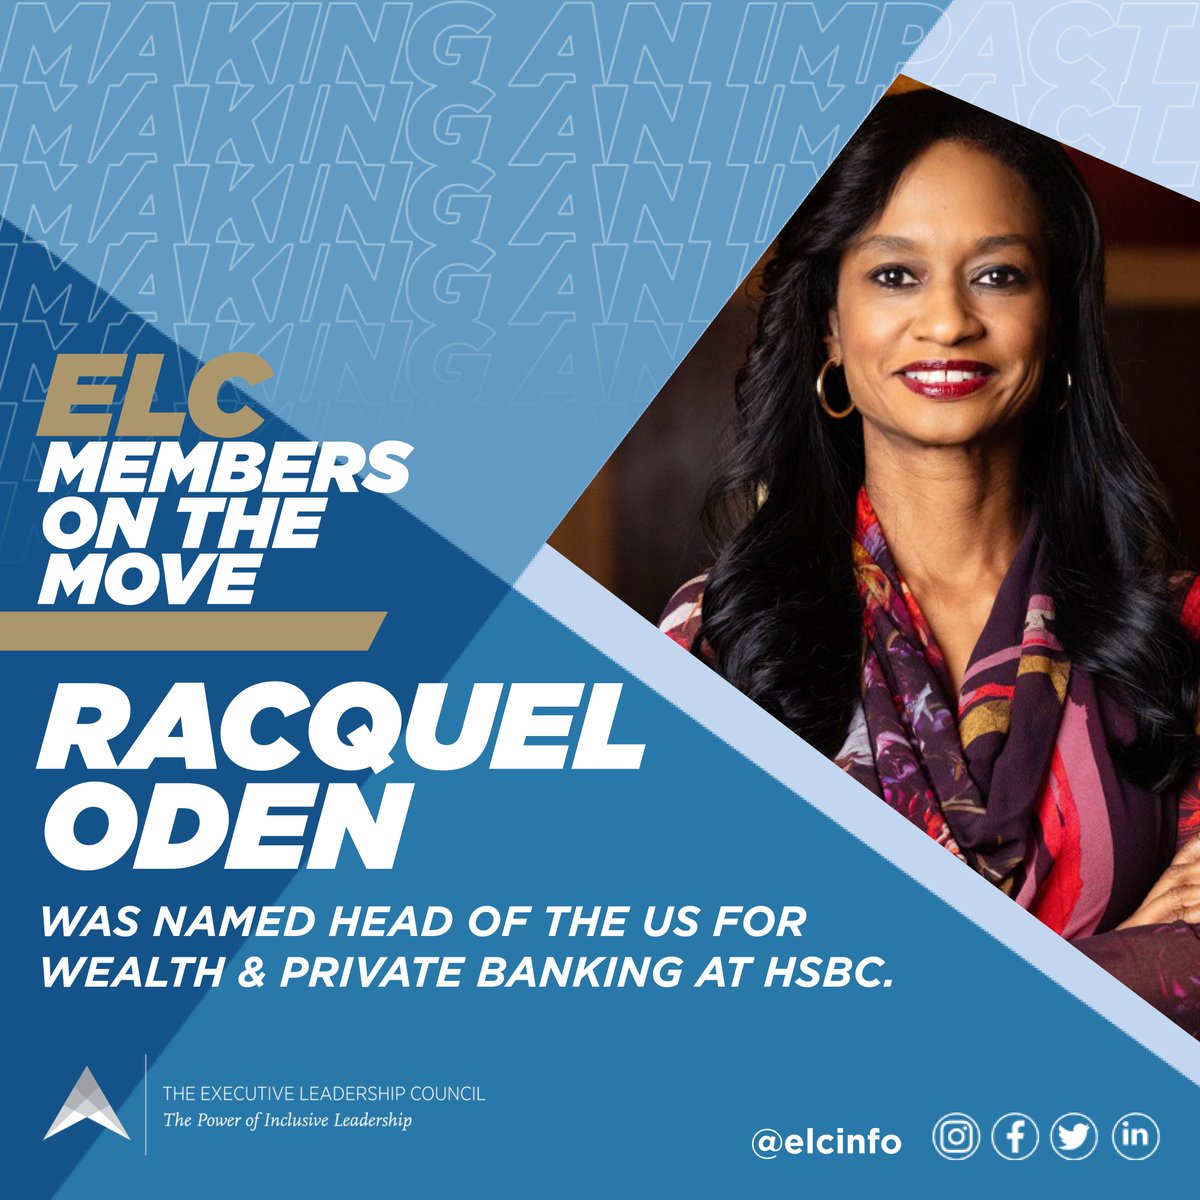 Congratulations to #ELCMember Racquel Oden, who was named Head of the US for Wealth & Private Banking at @HSBC. #ELCMembersOnTheMove #BlackWomenLead #BlackExecutives #BlackLeadership